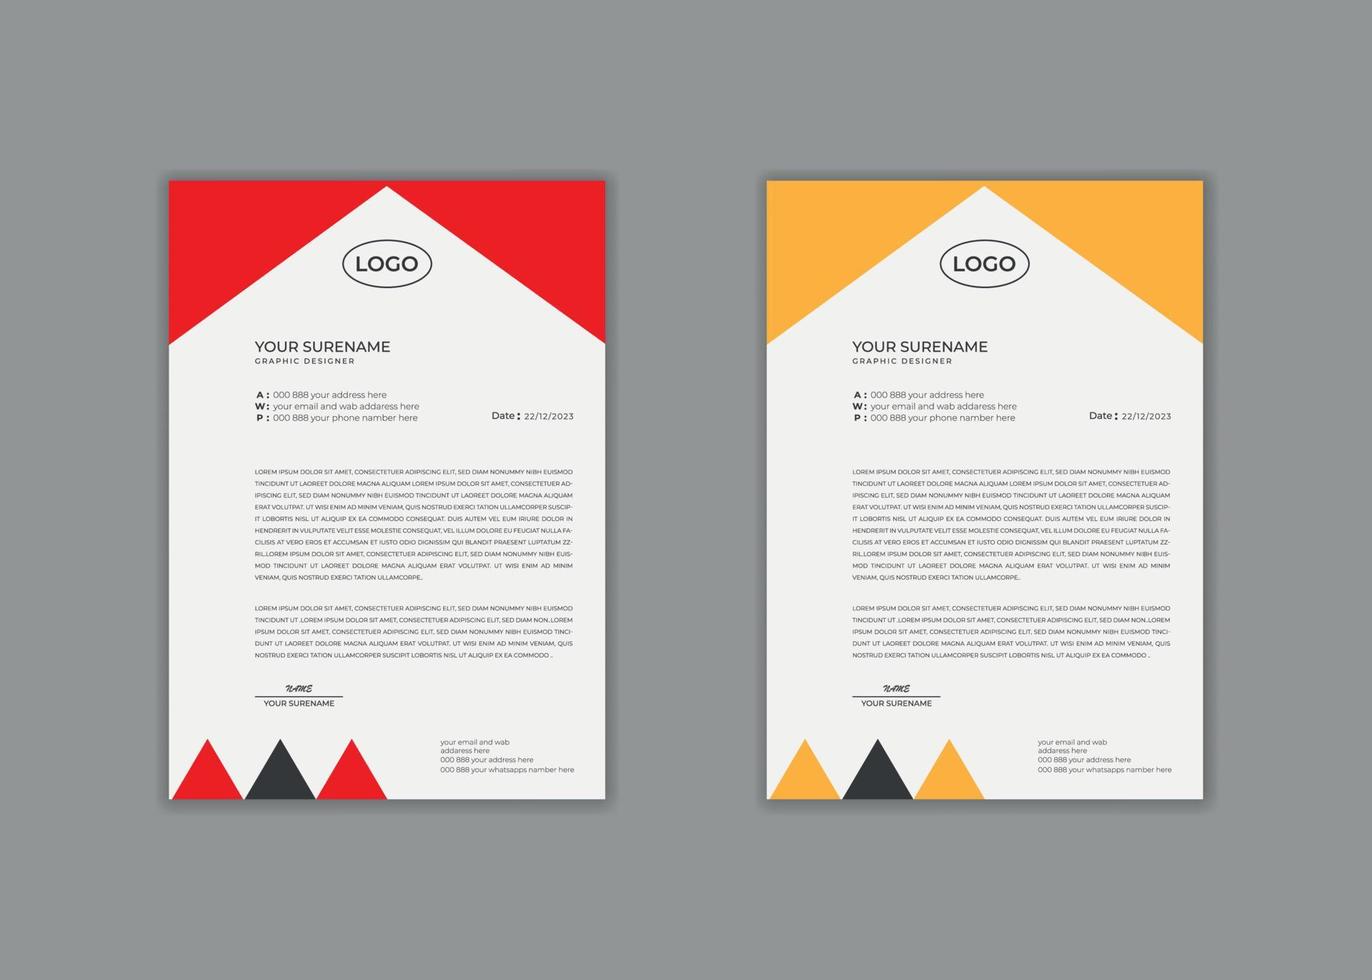 letterhead template, letterhead design, vector abstract  creative Professional modern simple unique school hospital medical new red and black corporate letterhead minimal template